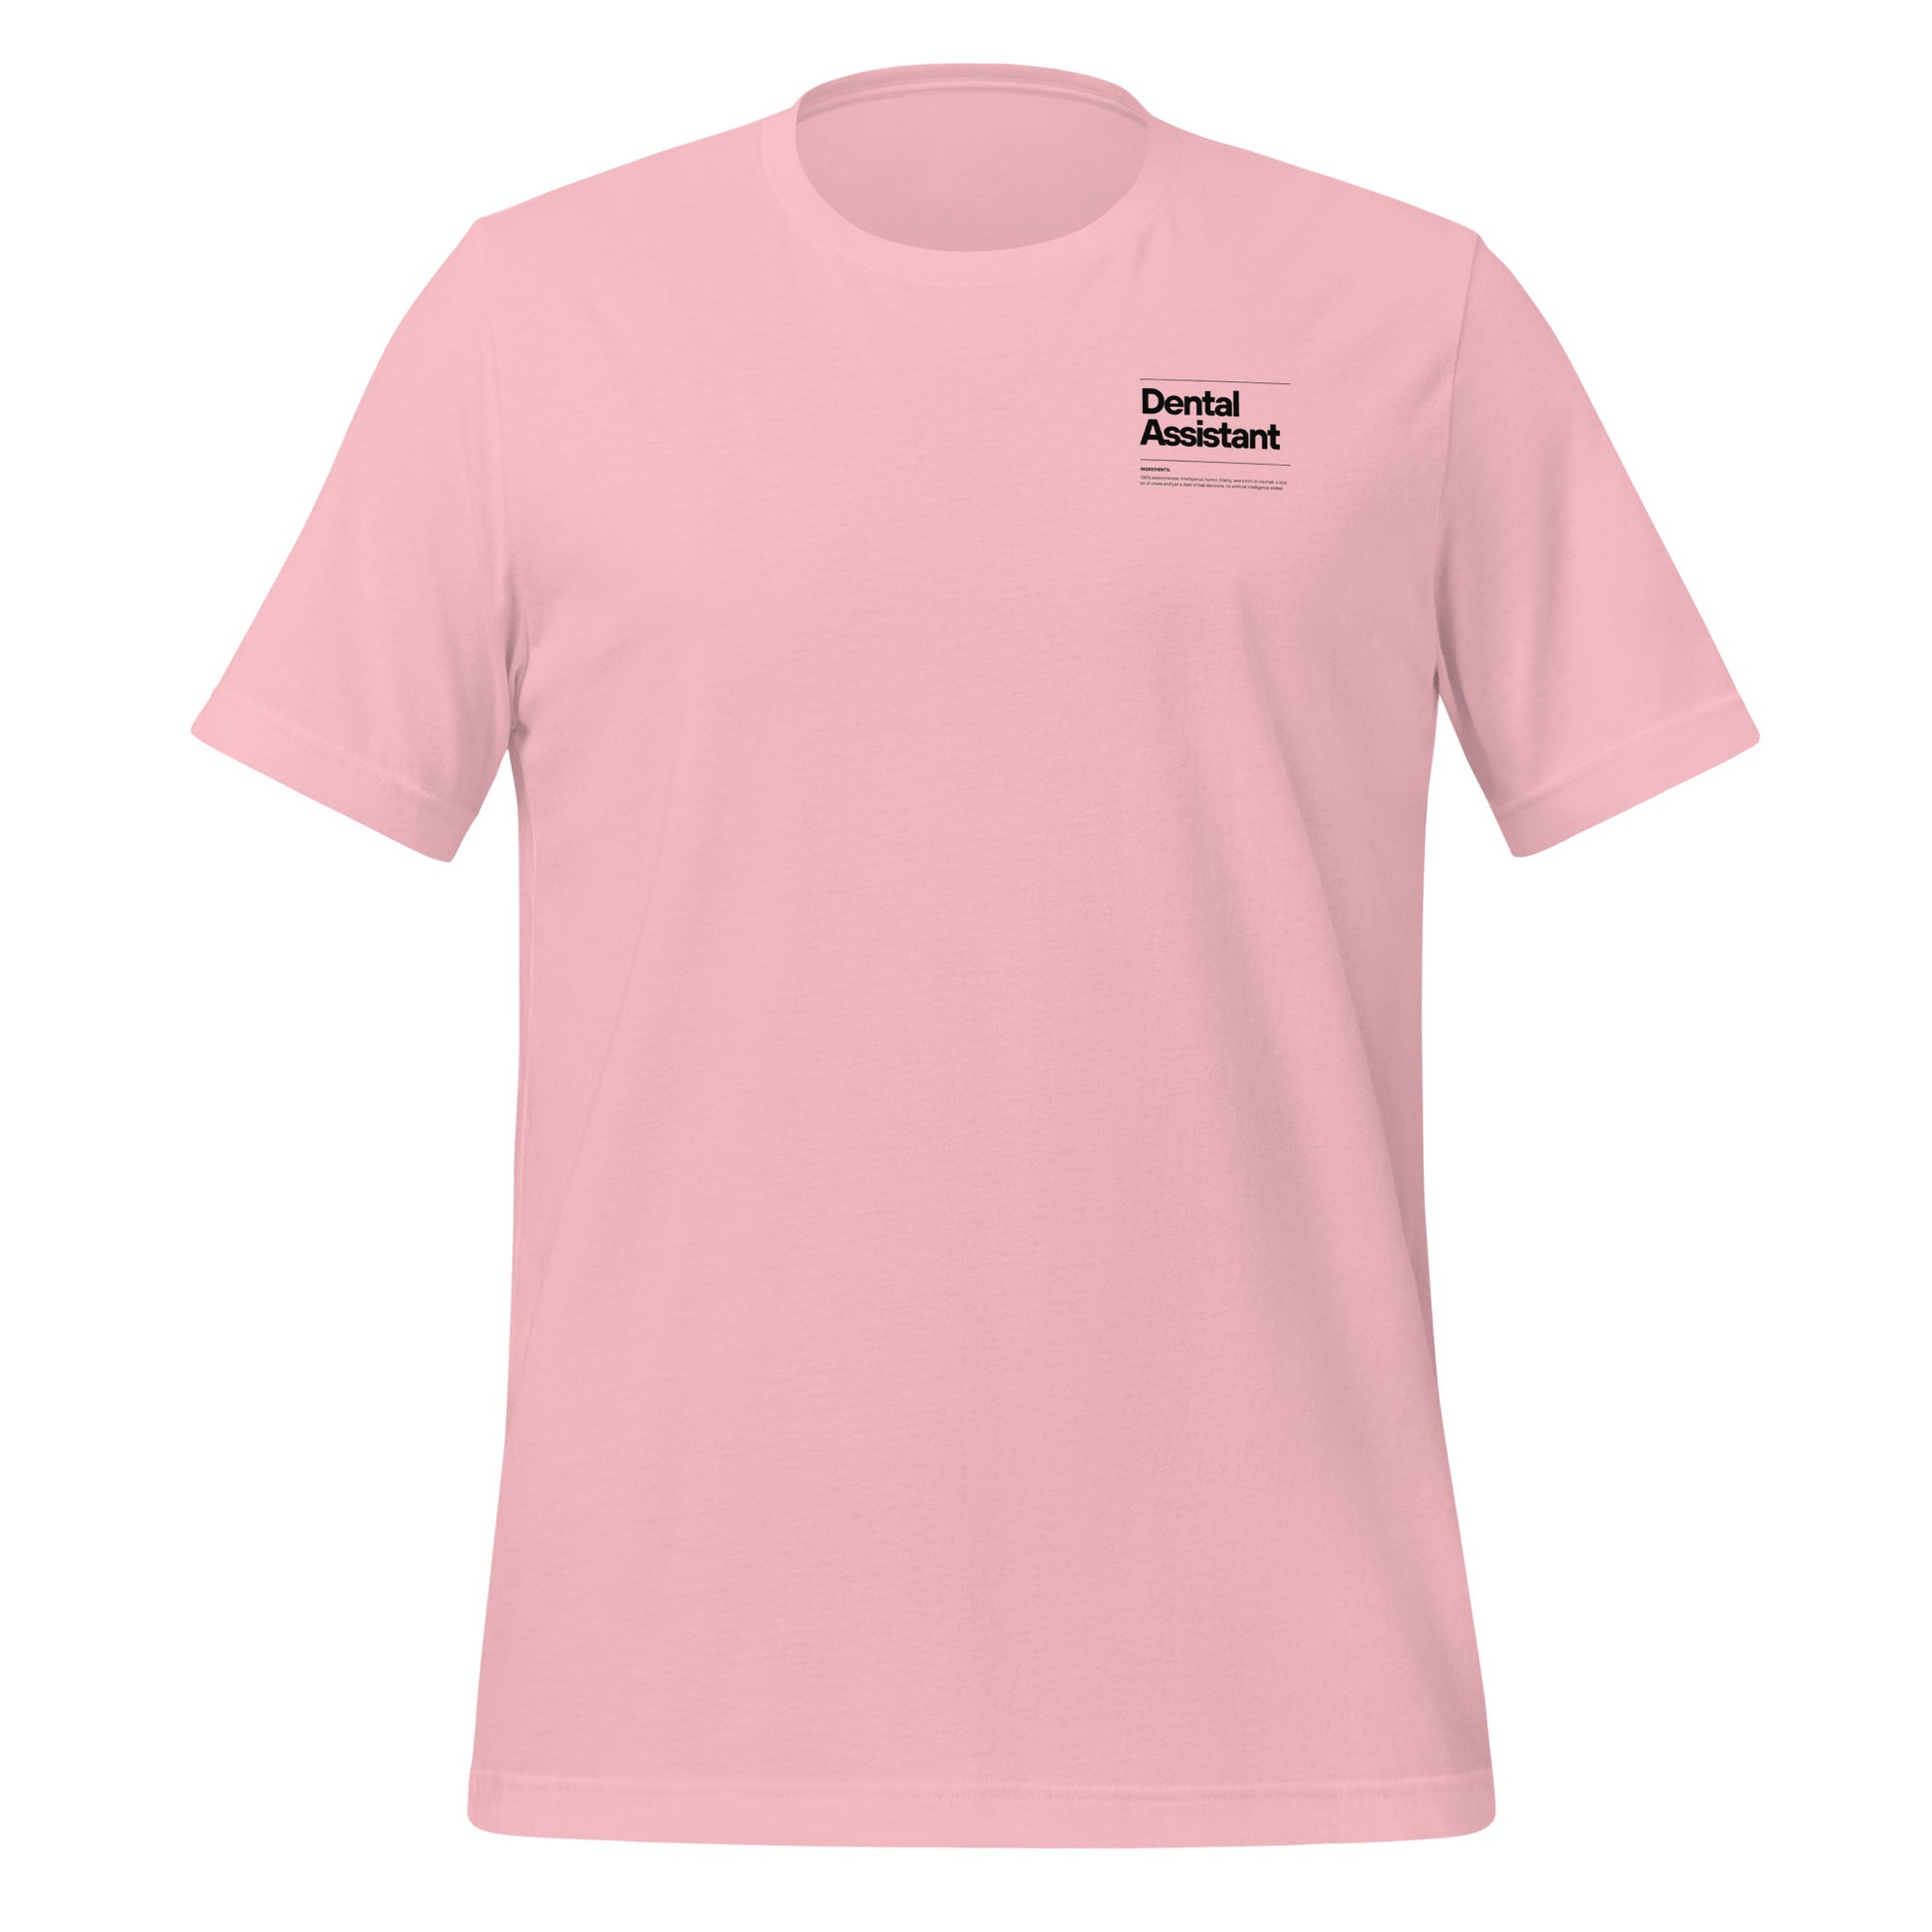 Pink dental assistant shirt featuring a creative label design with icons and text, perfect for dental assistants who want to express their identity and passion for their job - dental shirts front view.